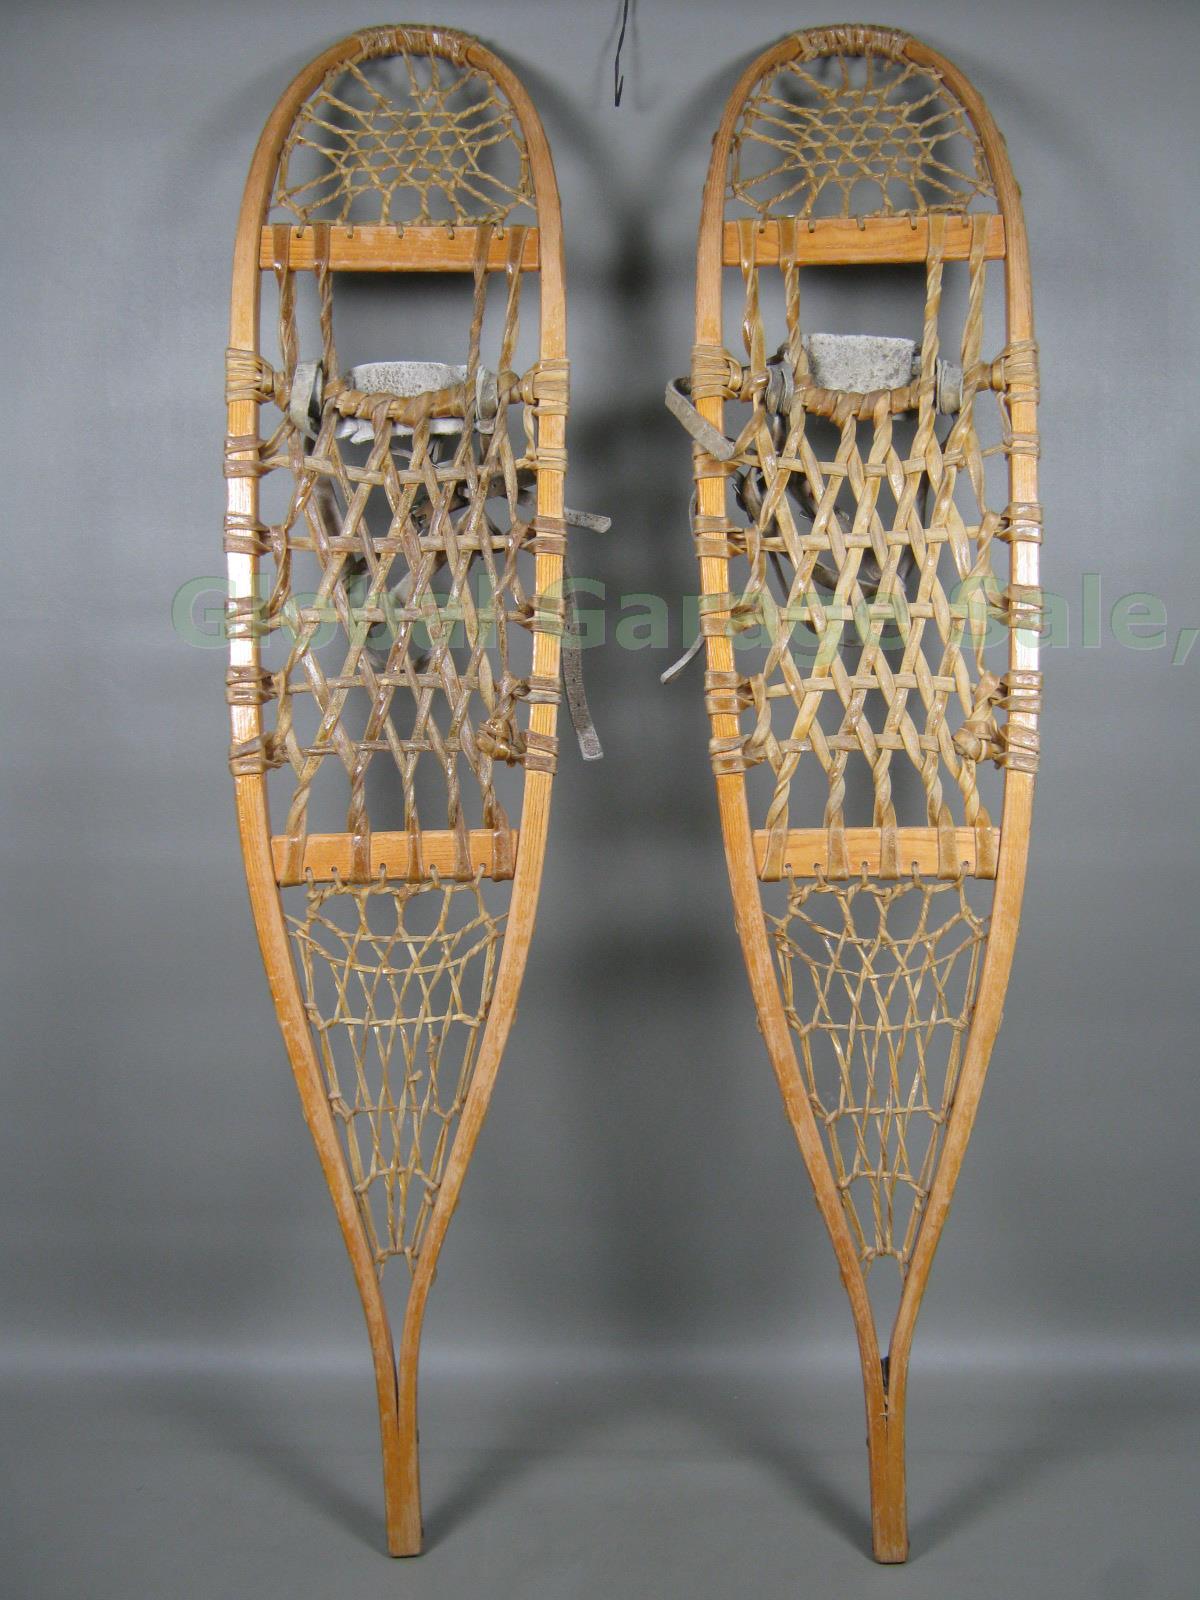 Vtg Antique LL Bean The Maine Wooden Snowshoes 10x46 Made In Freeport Maine NR!! 5